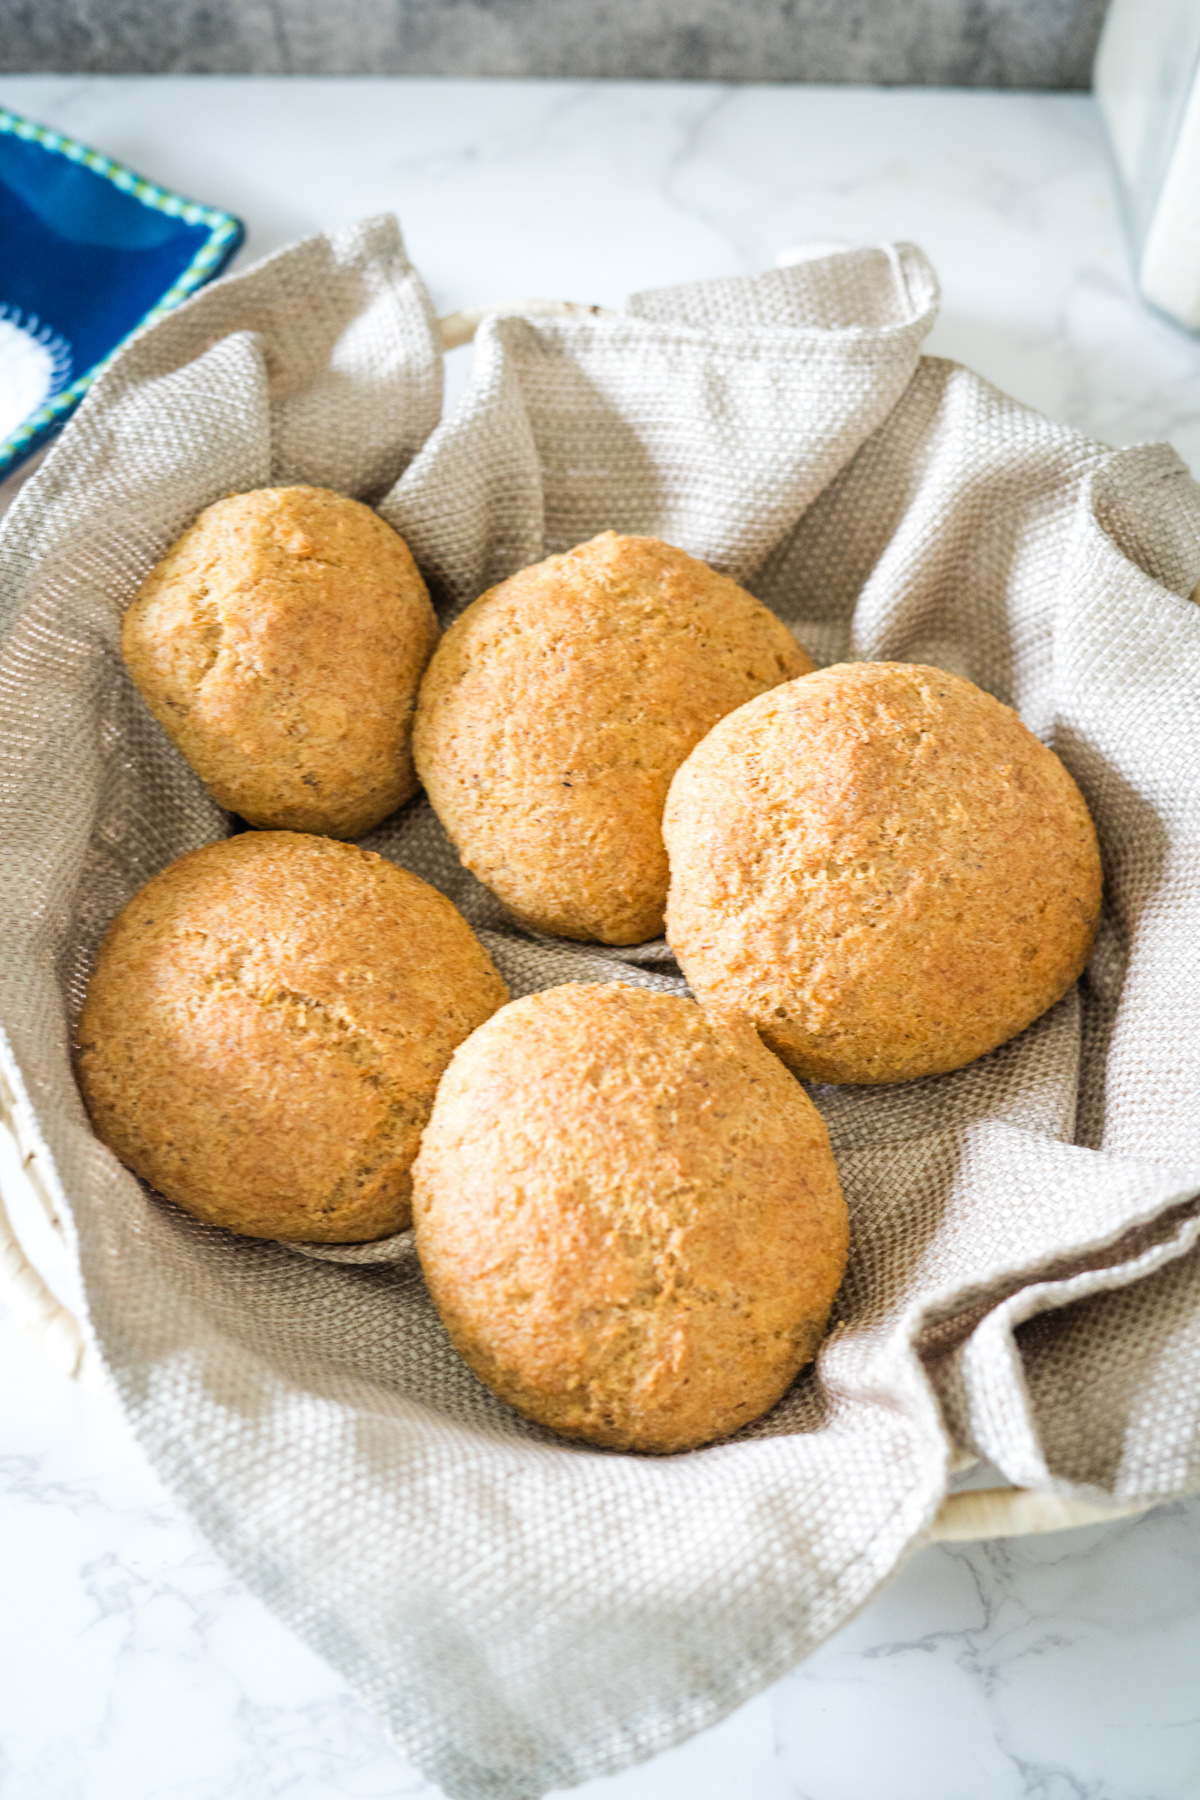 A bowl of flaxseed bread buns sitting on a table.